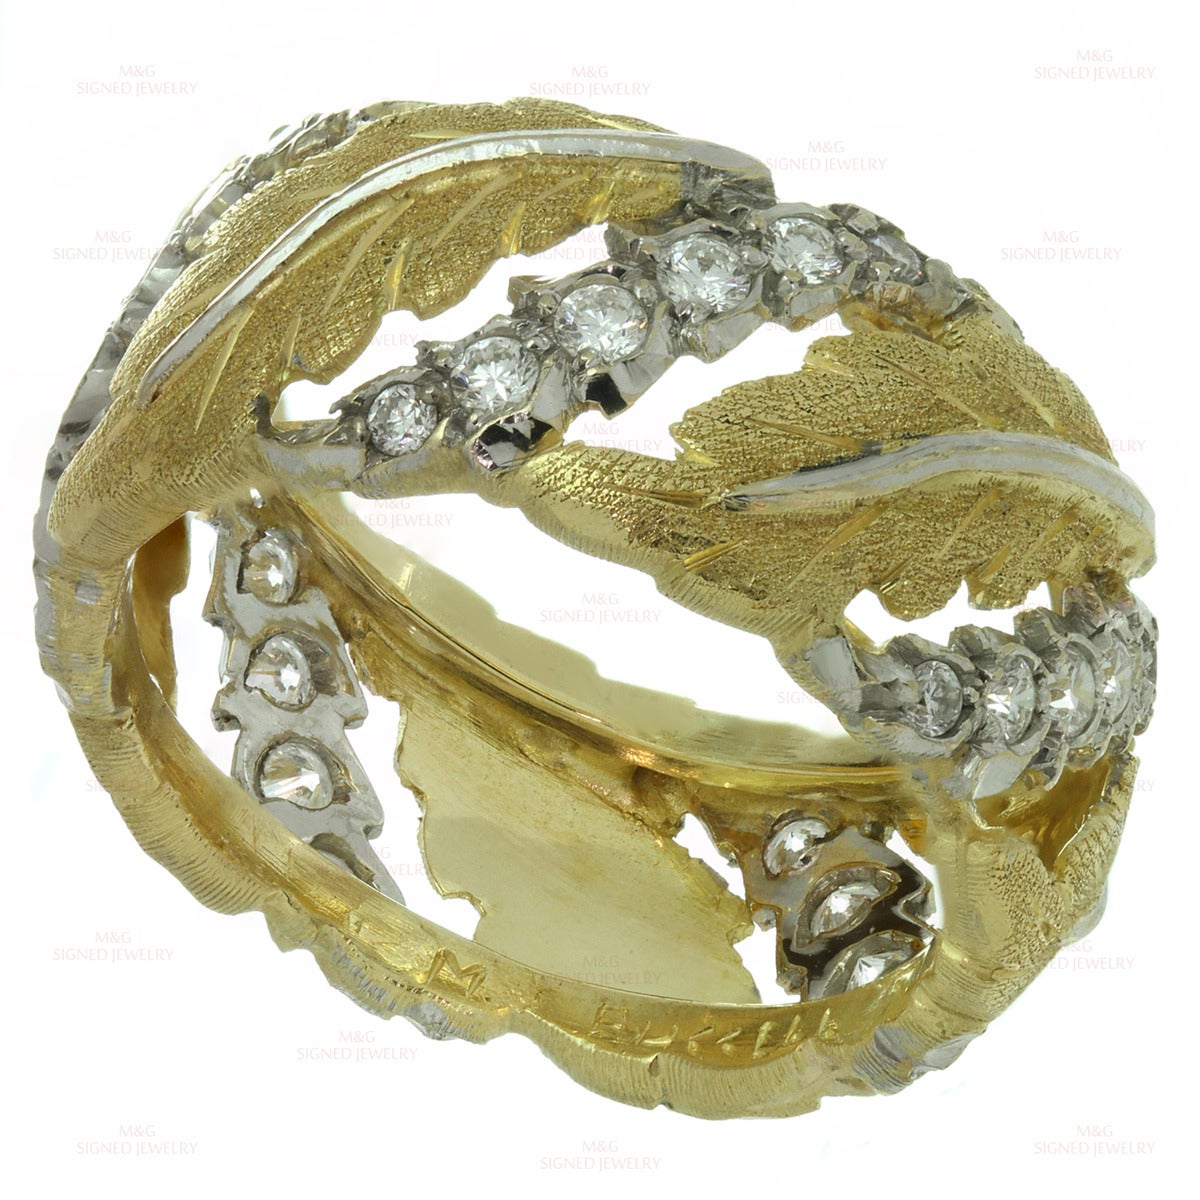 This elegant Mario Buccellati band ring features a leaf design crafted in 18k yellow gold and accented with sparkling brilliant-cut round F-G VVS2-VS1 diamonds of an estimated 0.90 carats set in 18k white gold. Made in Italy circa 1990s.